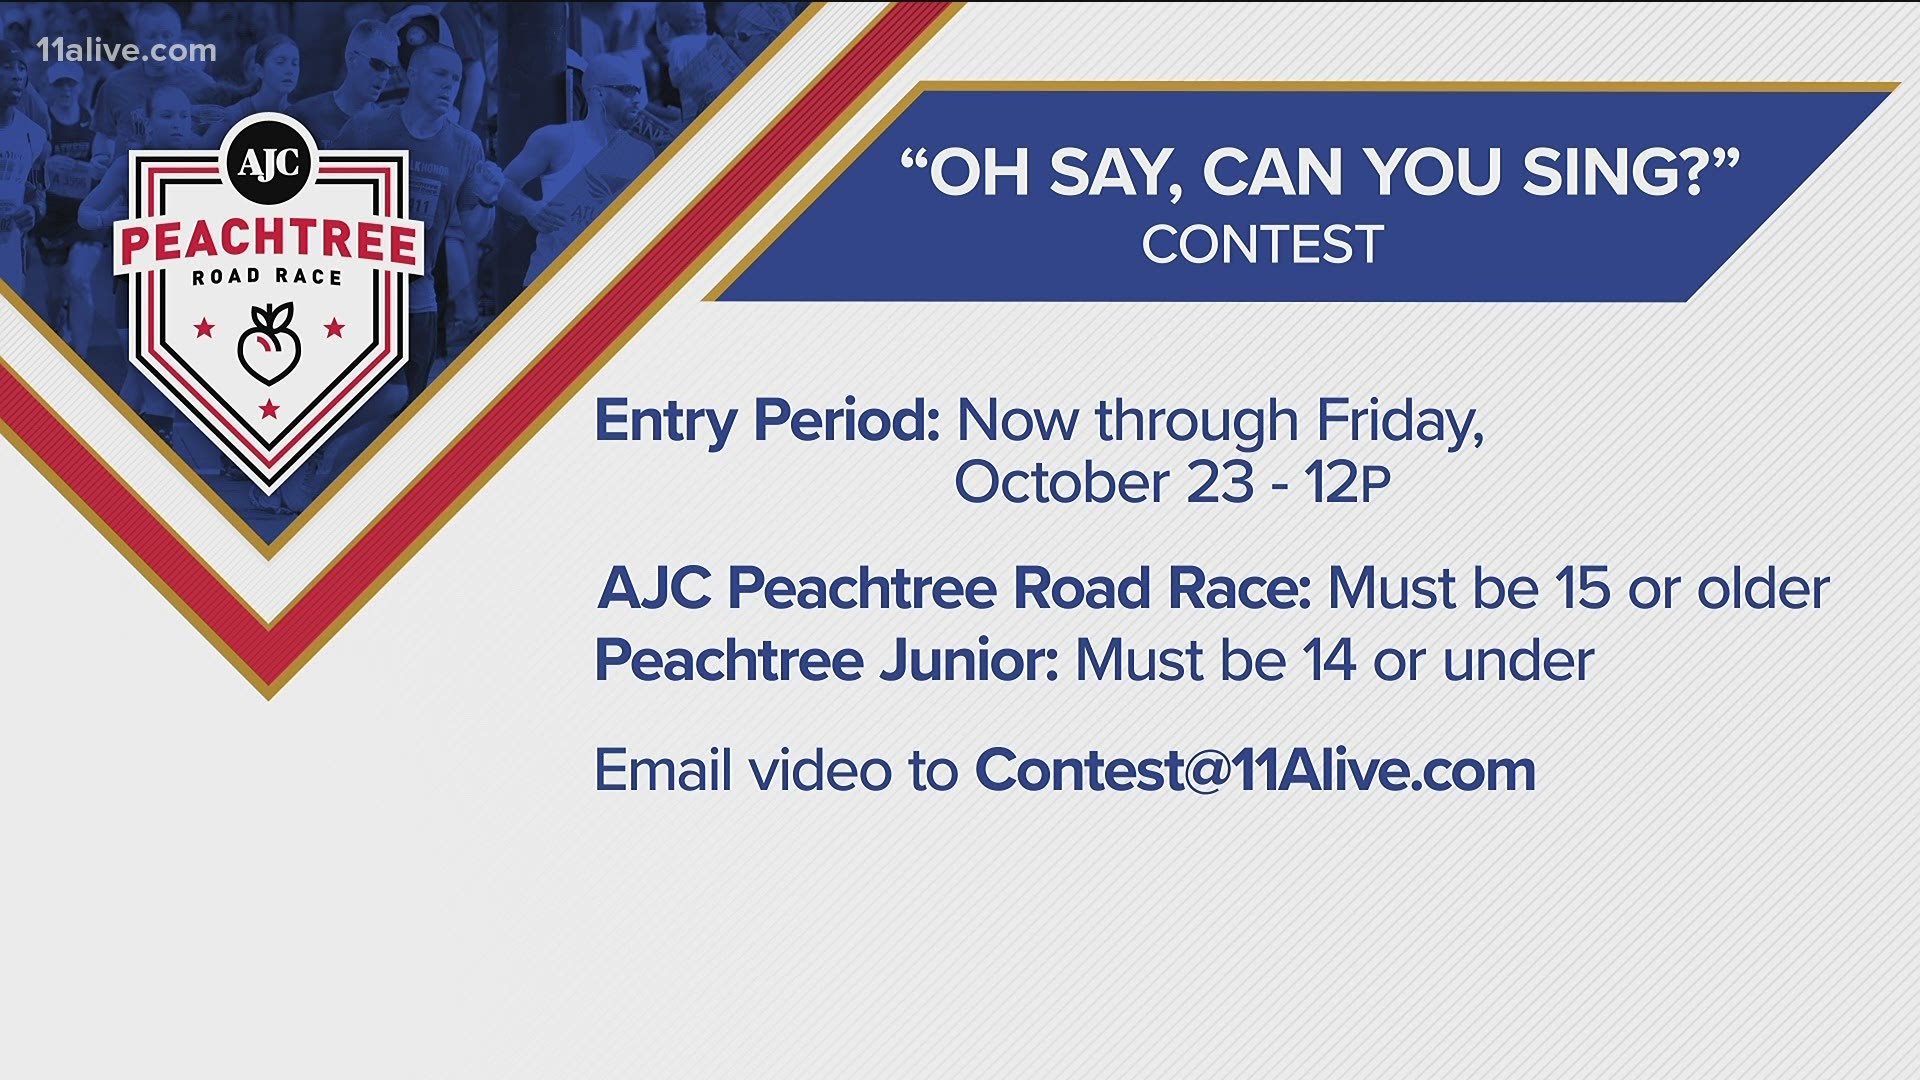 Enter to win a chance to perform the national anthem virtually for the AJC Peachtree Road Race on Thanksgiving Day.